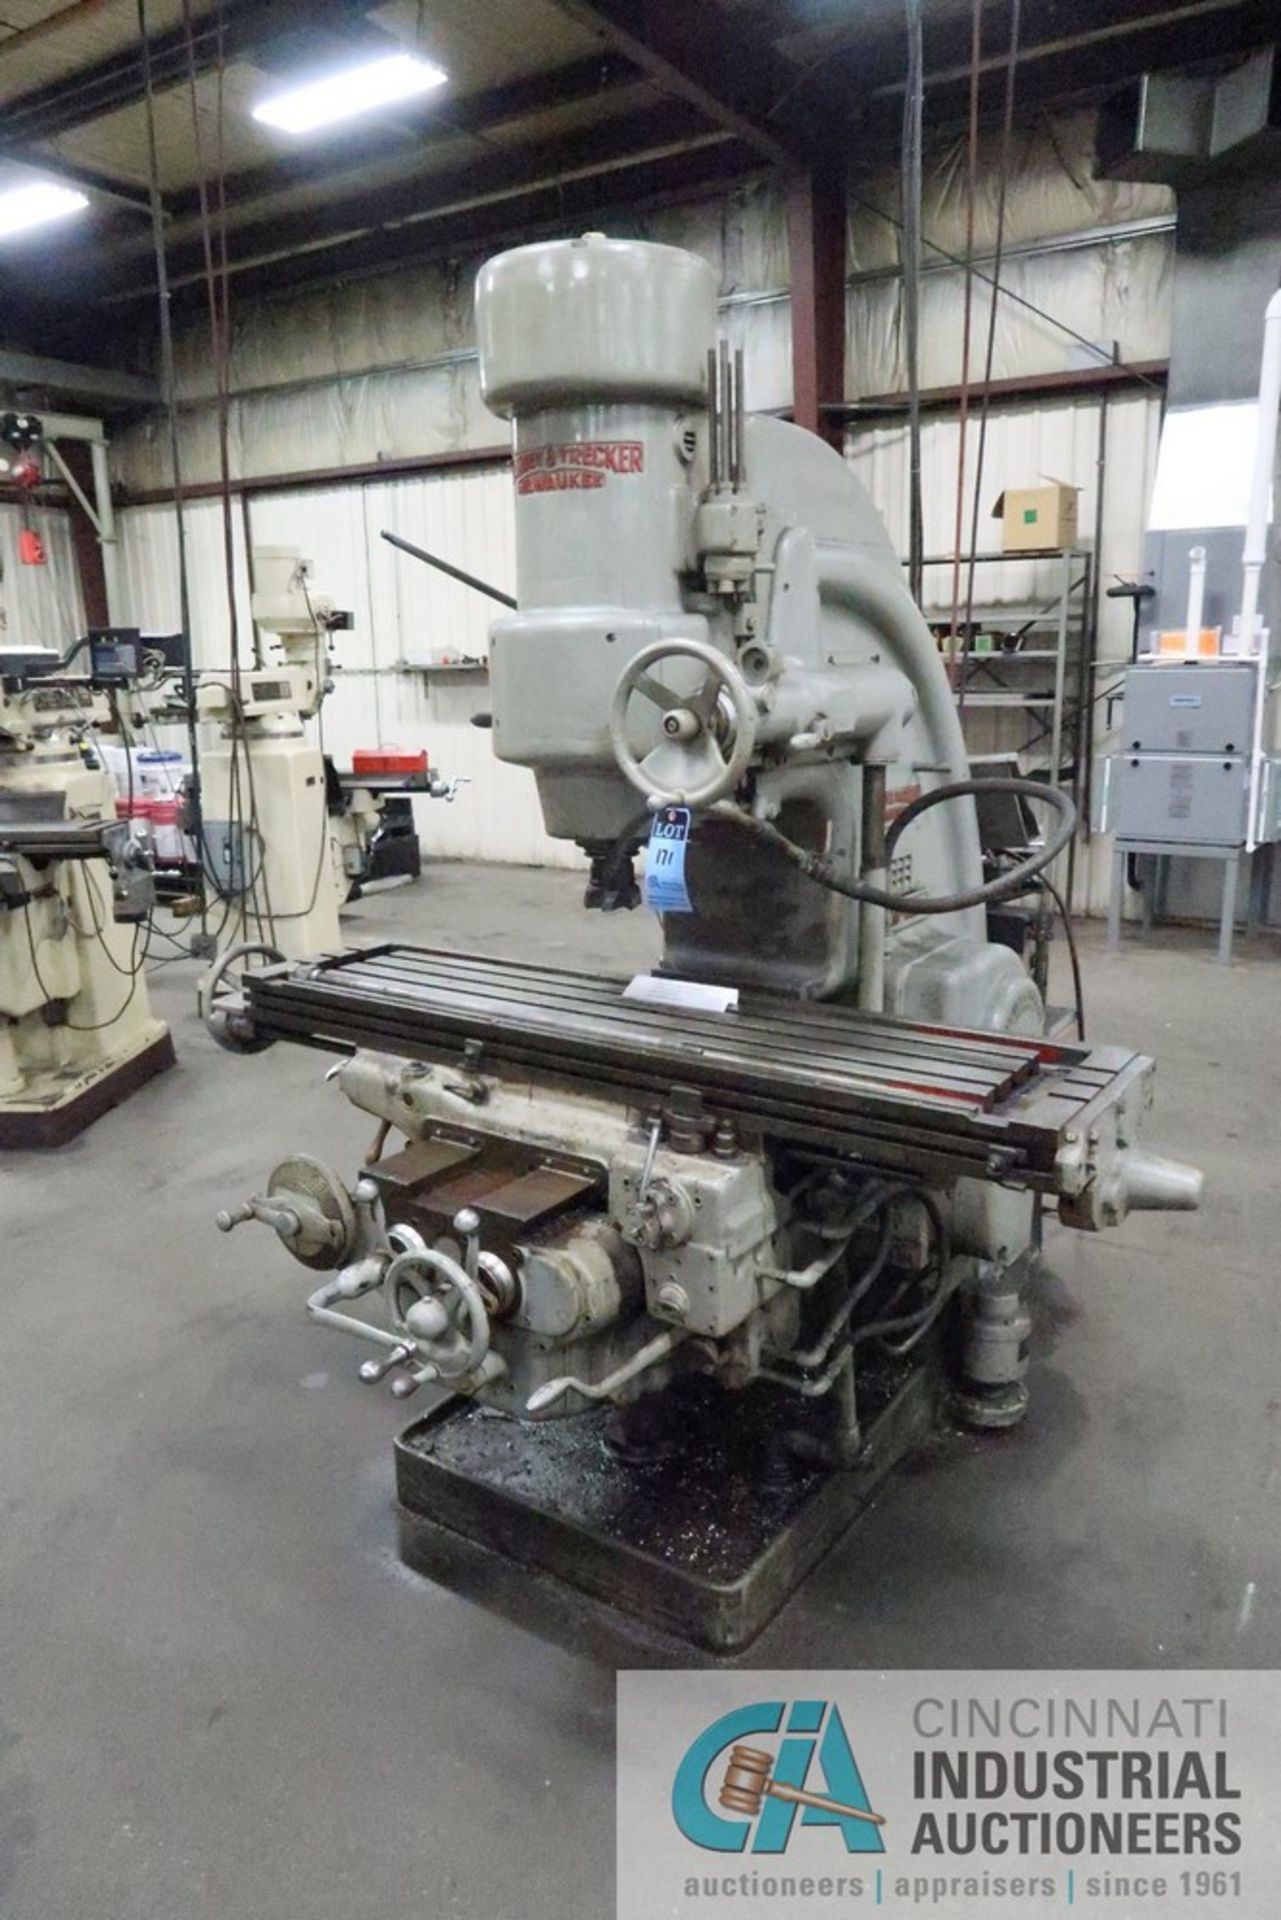 15 HP KEARNEY AND TRECKER MODEL 3CK VERTICAL MILL; S/N 6-6721, 64" X 15" TABLE, SPINDLE SPEED 15-1,